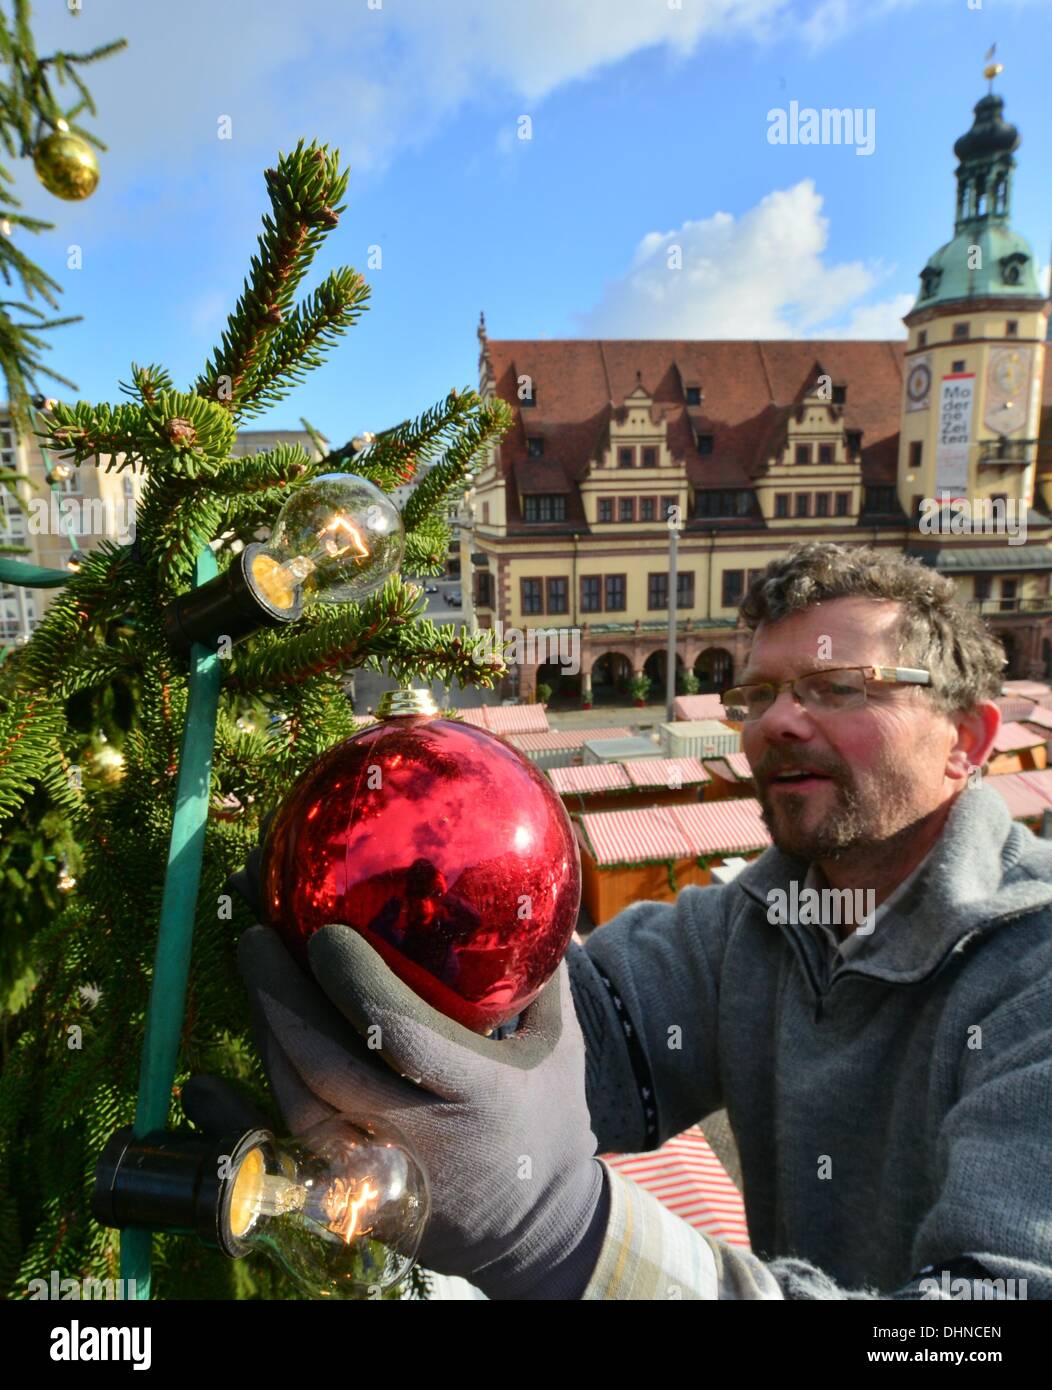 Leipzig, Germany. 13th Nov, 2013. Employee Andreas Gruhne decorates a Christmas tree with 1000 christmas tree baubles and 2000 christmas tree lights on the market square in Leipzig, Germany, 13 November 2013. The 20 metre tall silver spruce was cut from a forest near Markneukirchen in the Vogtland region and is expected to be lit for the kick-off of this years' Christmas market in Leipzig on 26 November 2013. Photo: Hendrik Schmidt/ZB/dpa/Alamy Live News Stock Photo